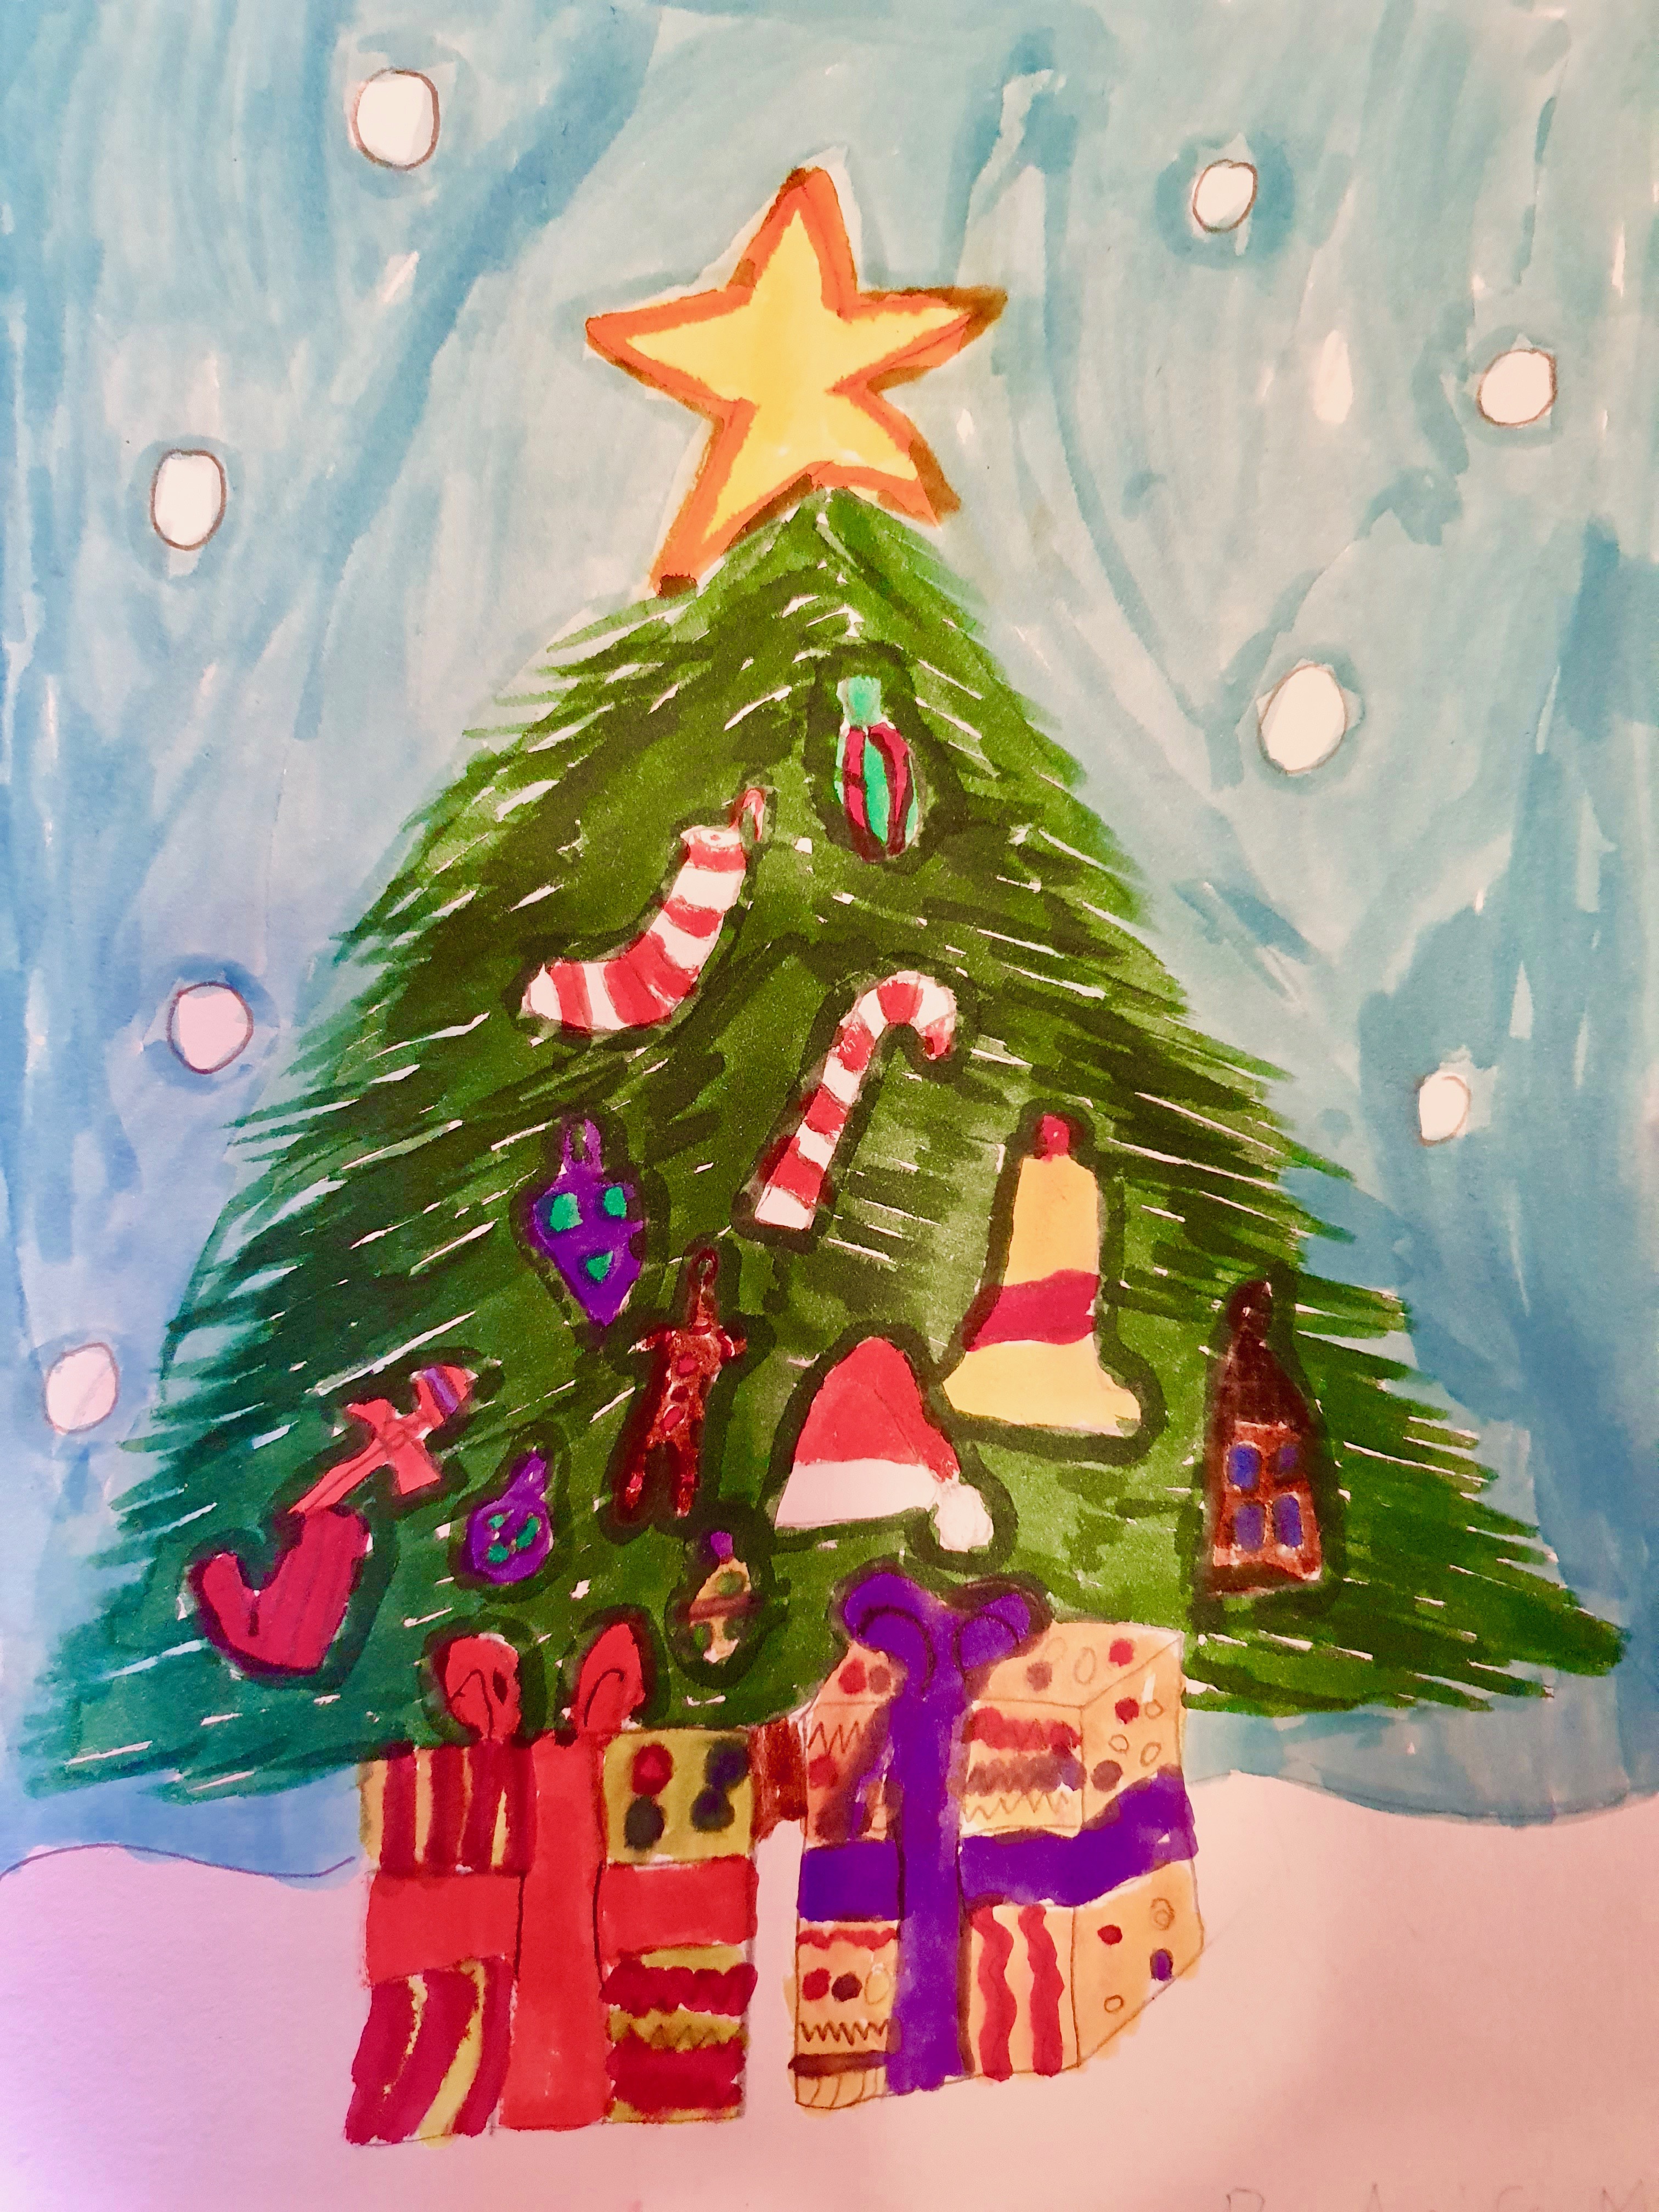 'Presents under the tree' by Aoife (8) from Galway